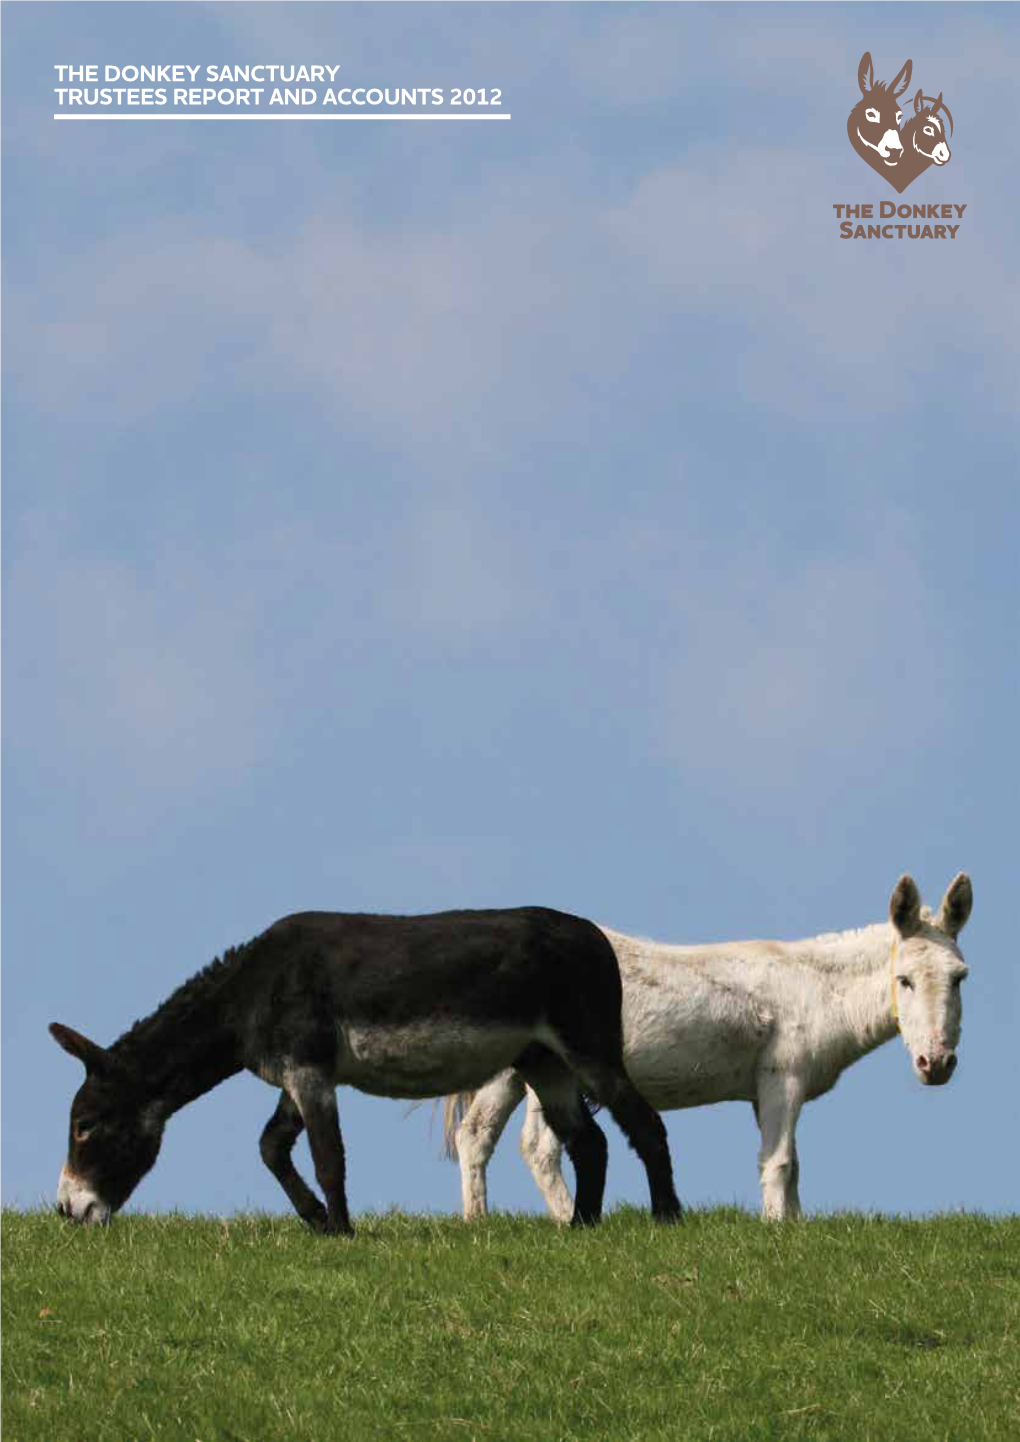 The Donkey Sanctuary Trustees Report and Accounts 2012 “I Love Everything About Donkeys